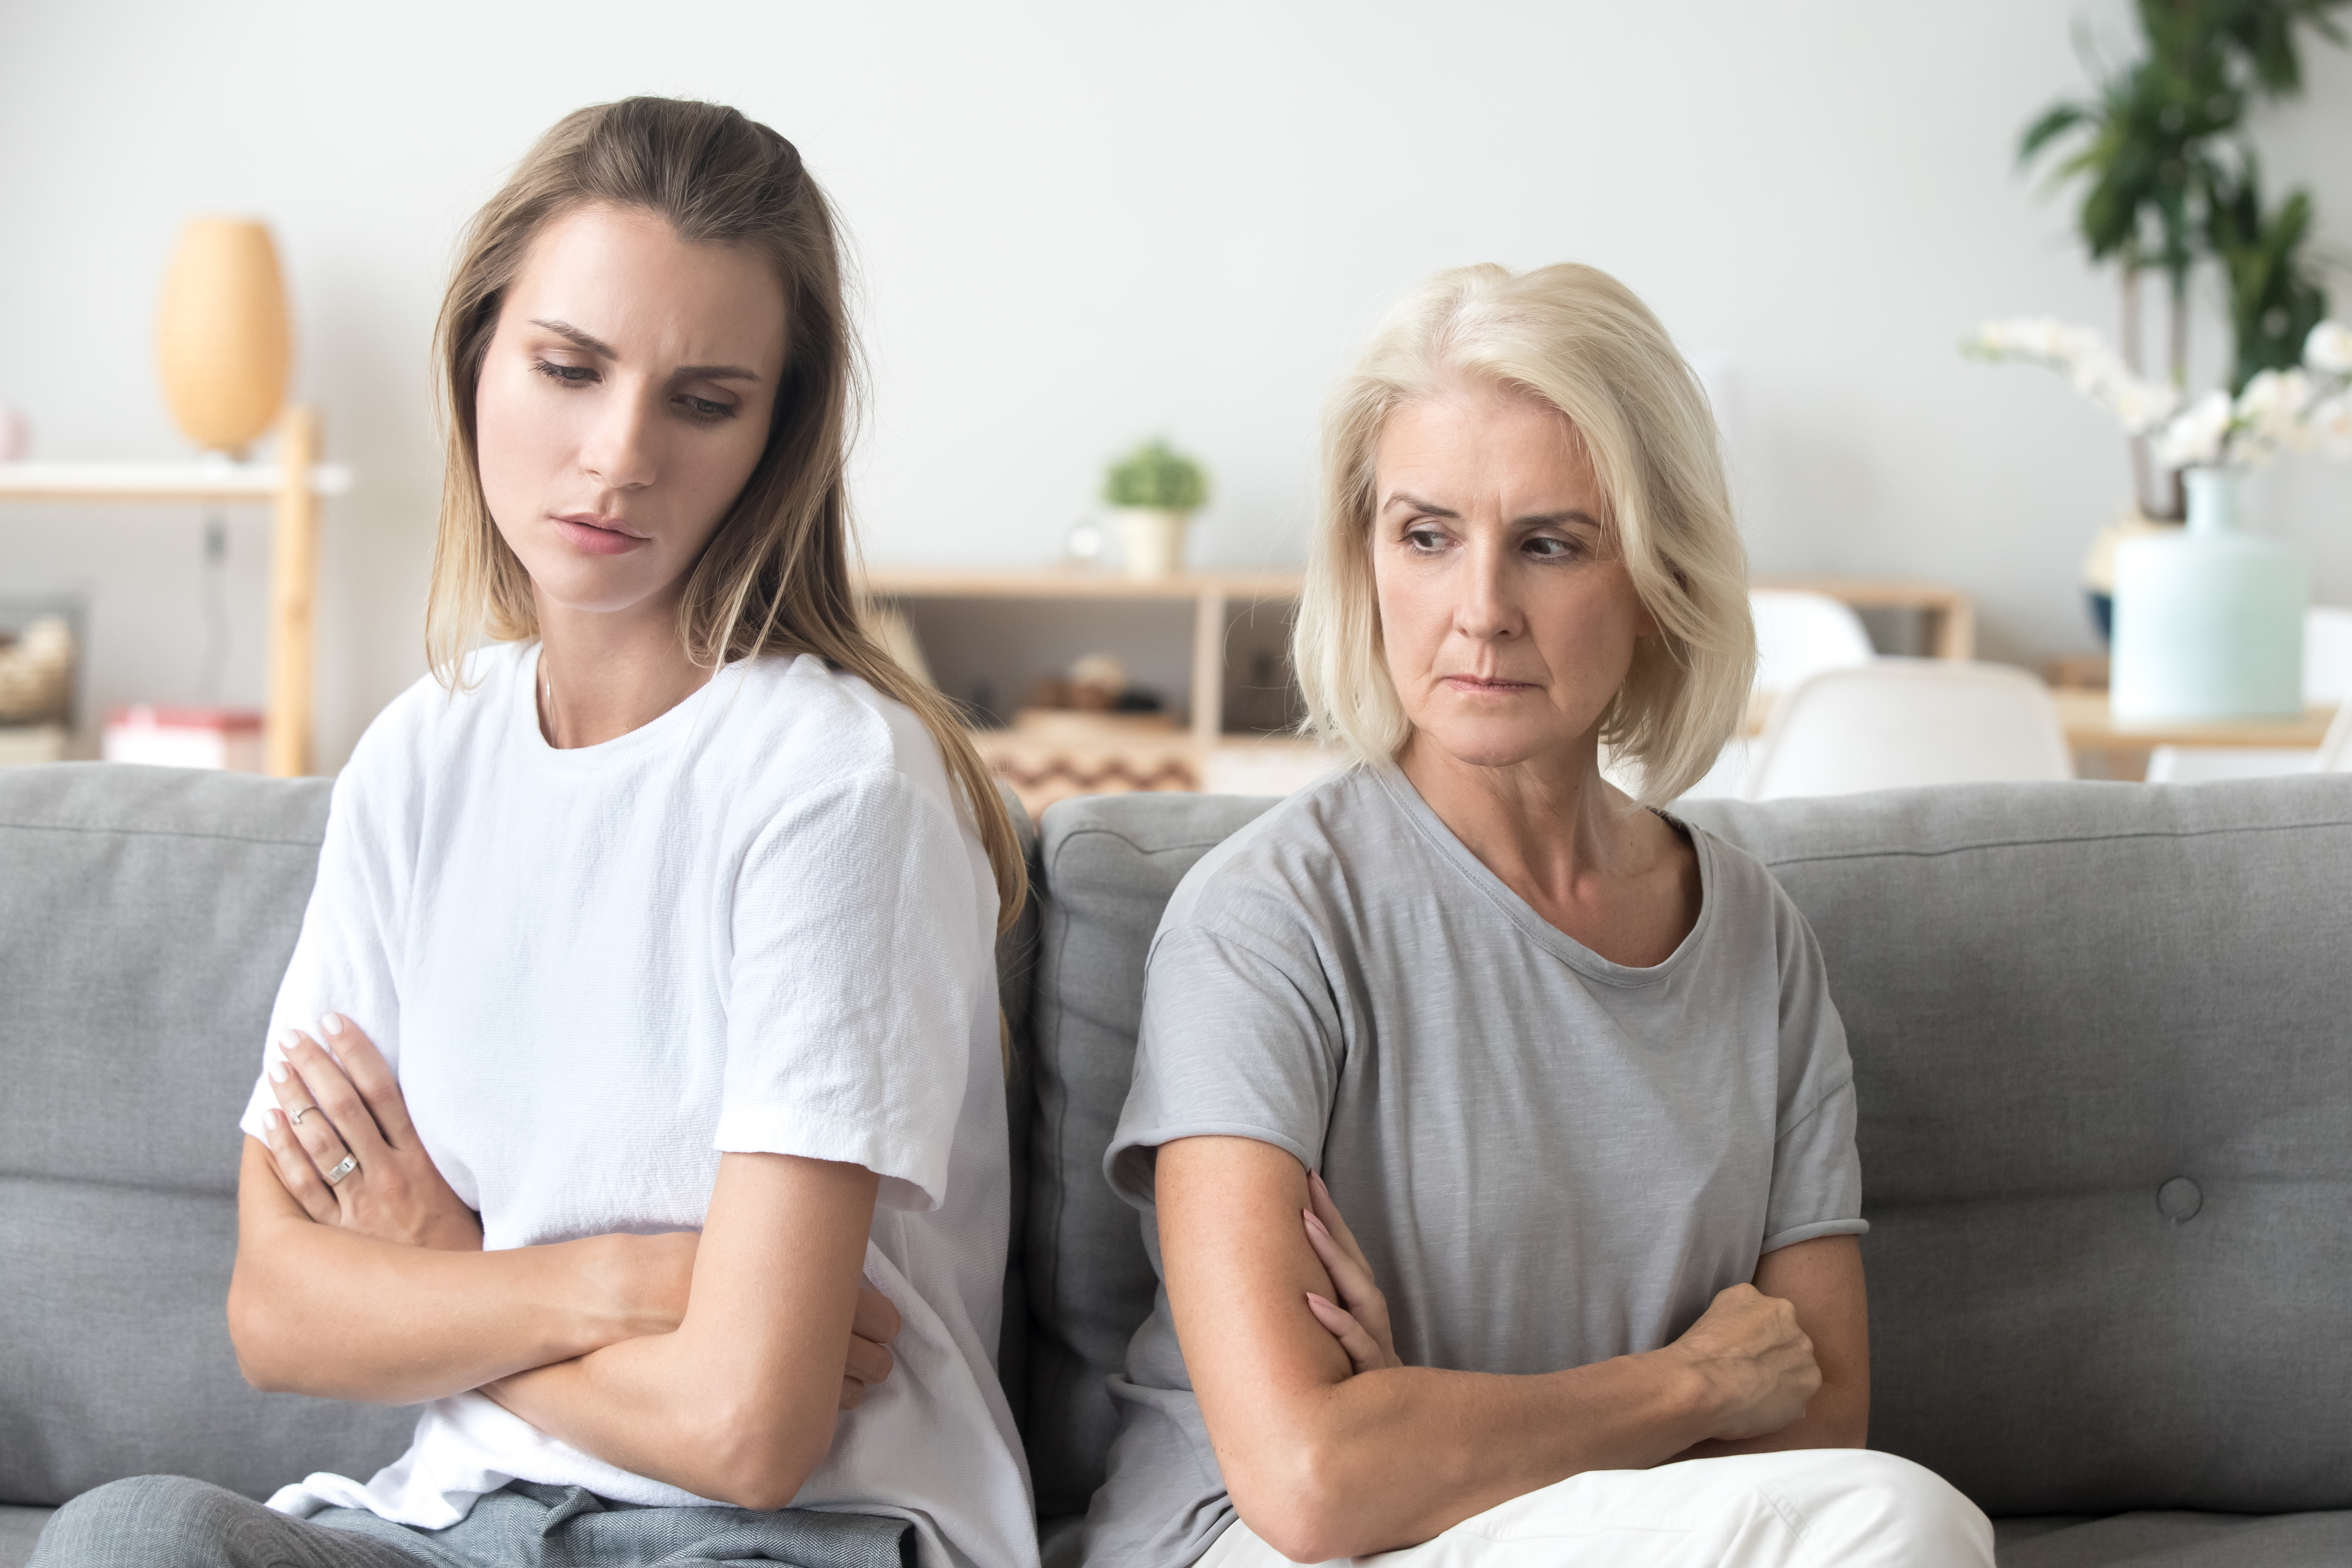 Two upset women sitting on a couch | Source: Shutterstock